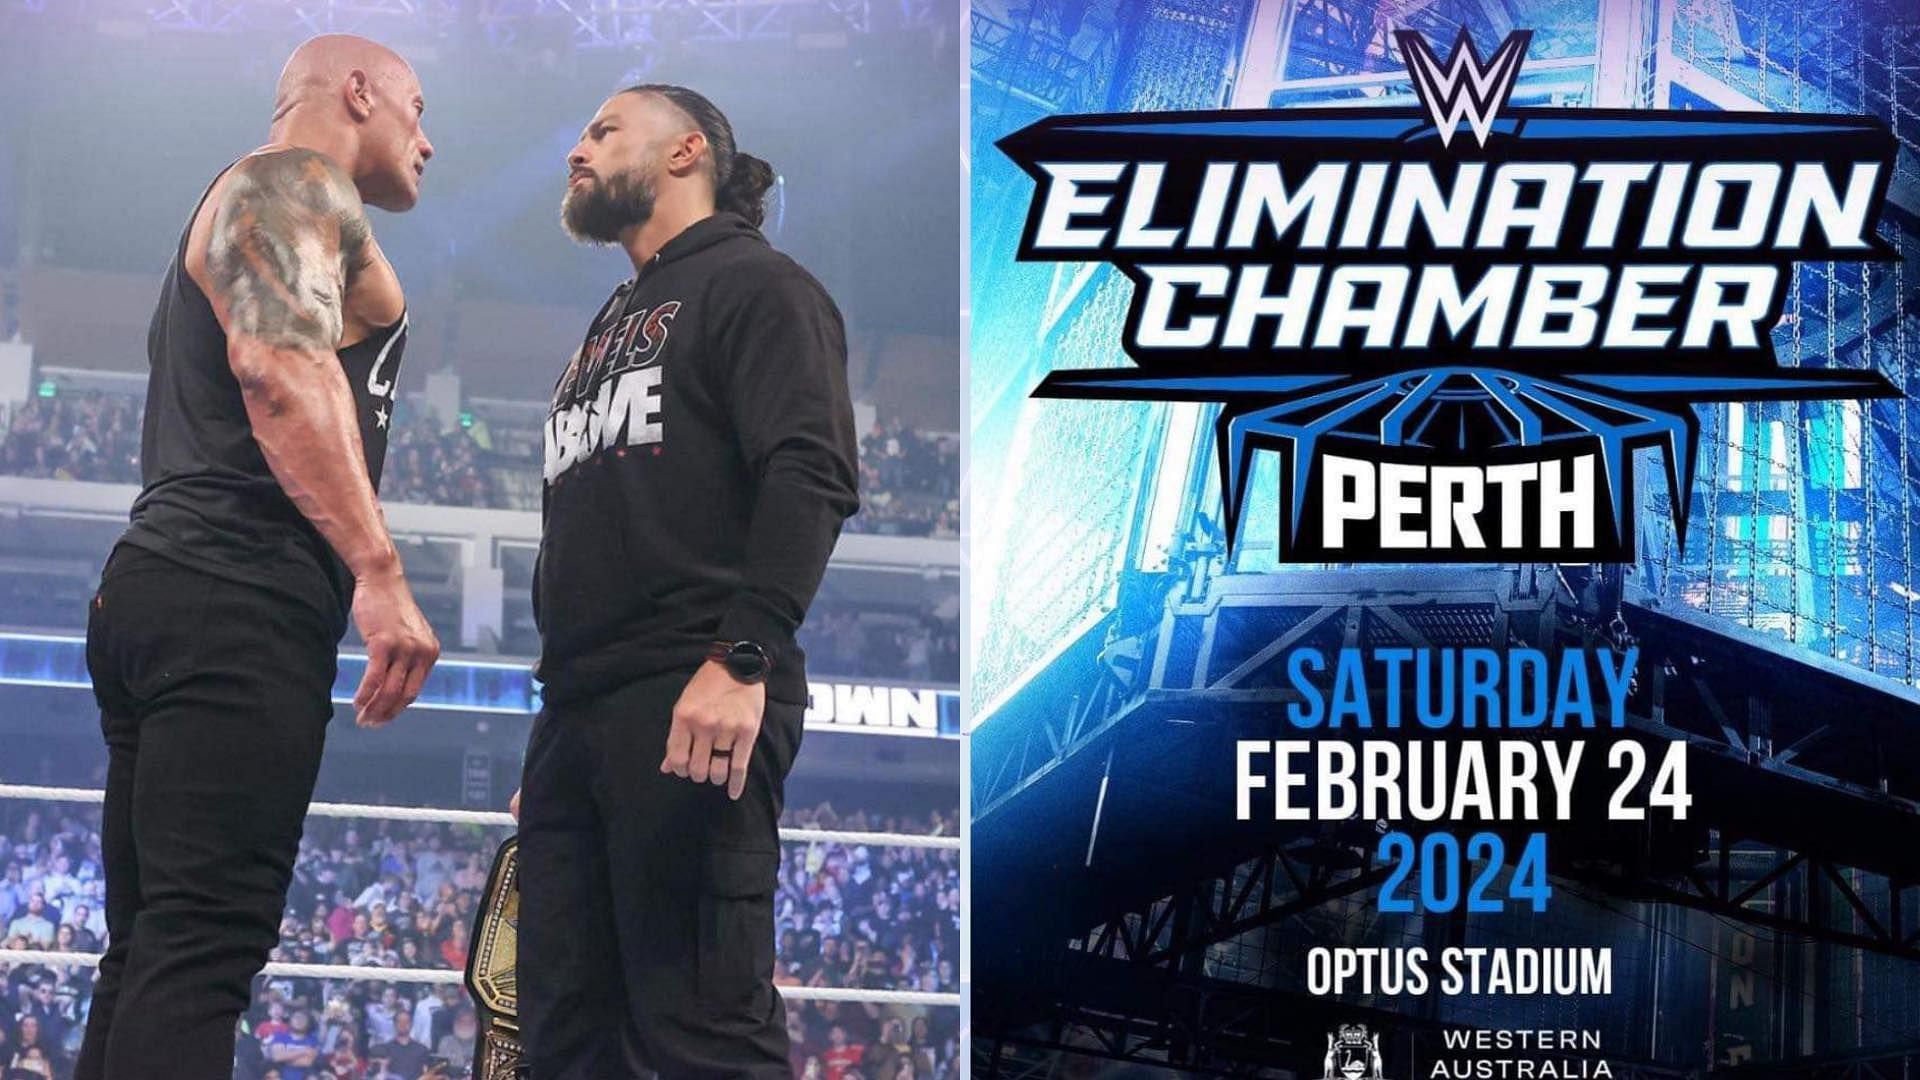 There could be some big surprises and major moments at WWE Elimination Chamber Perth